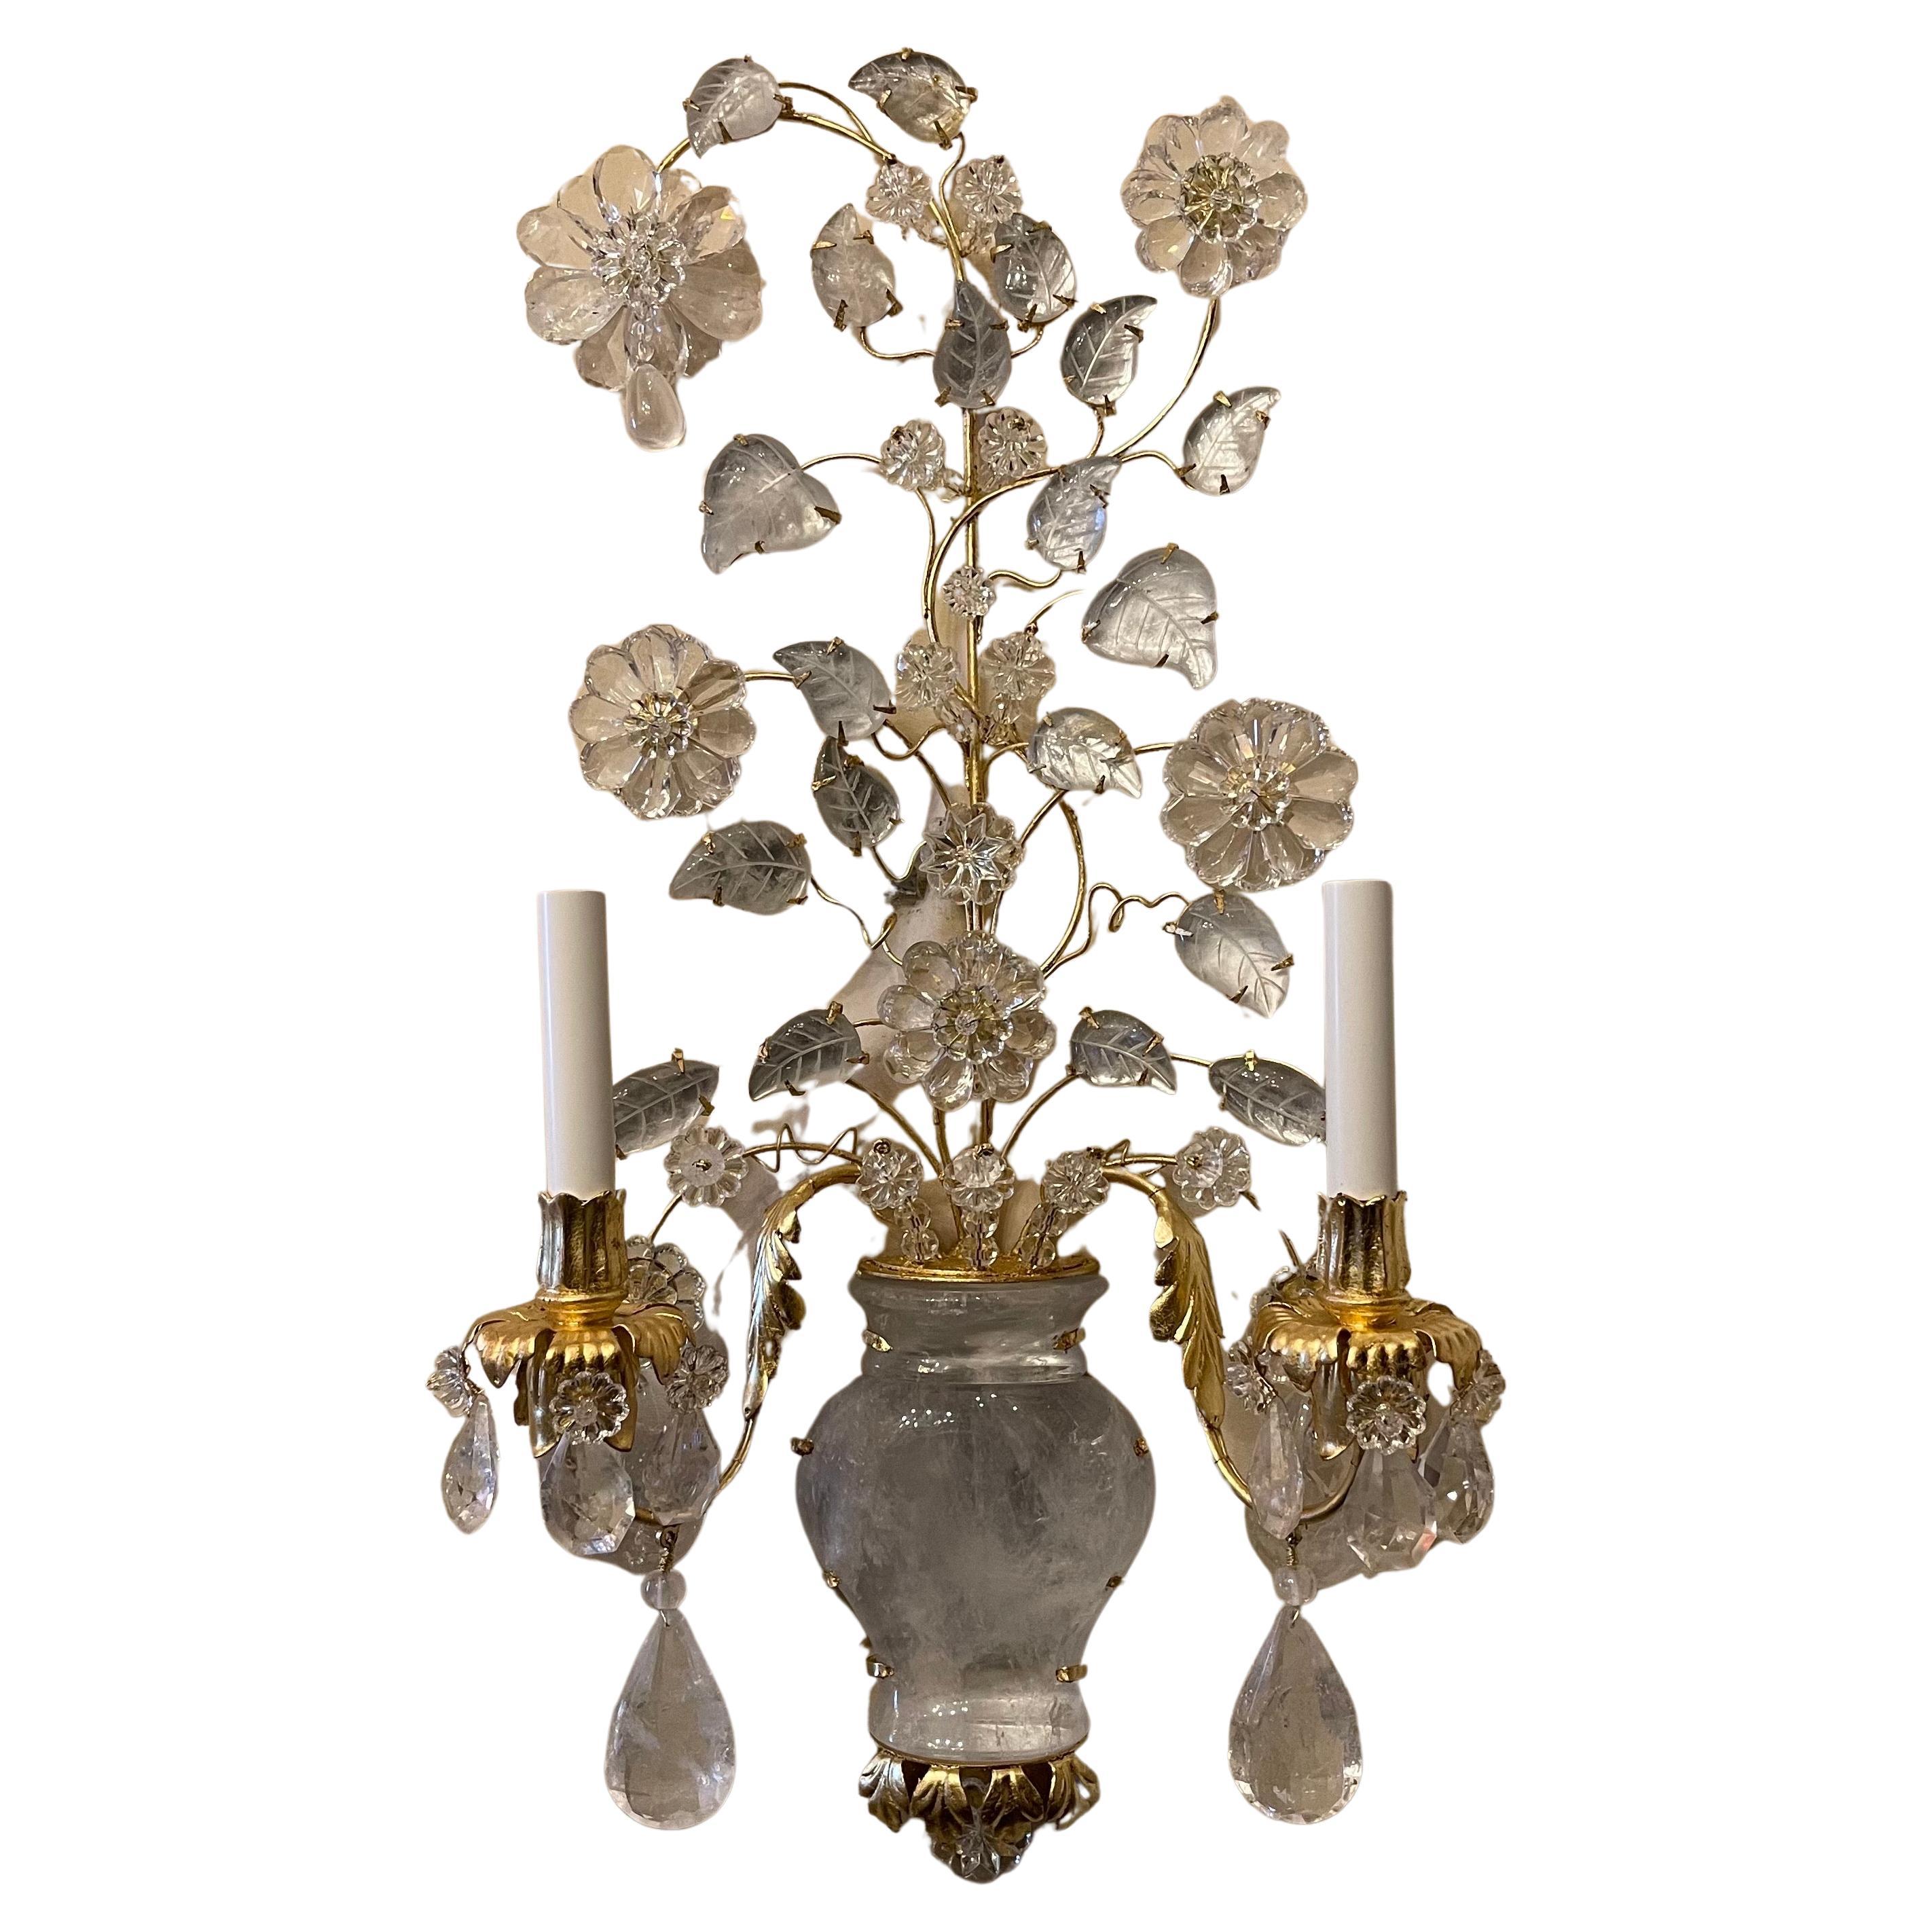 A Wonderful Large Pair Of Italian Rock Crystal Urn Form With Flower & Leaf Bouquet Gold Leaf Two Candelabra Light Sconces In The Manner / Style Of Baguès